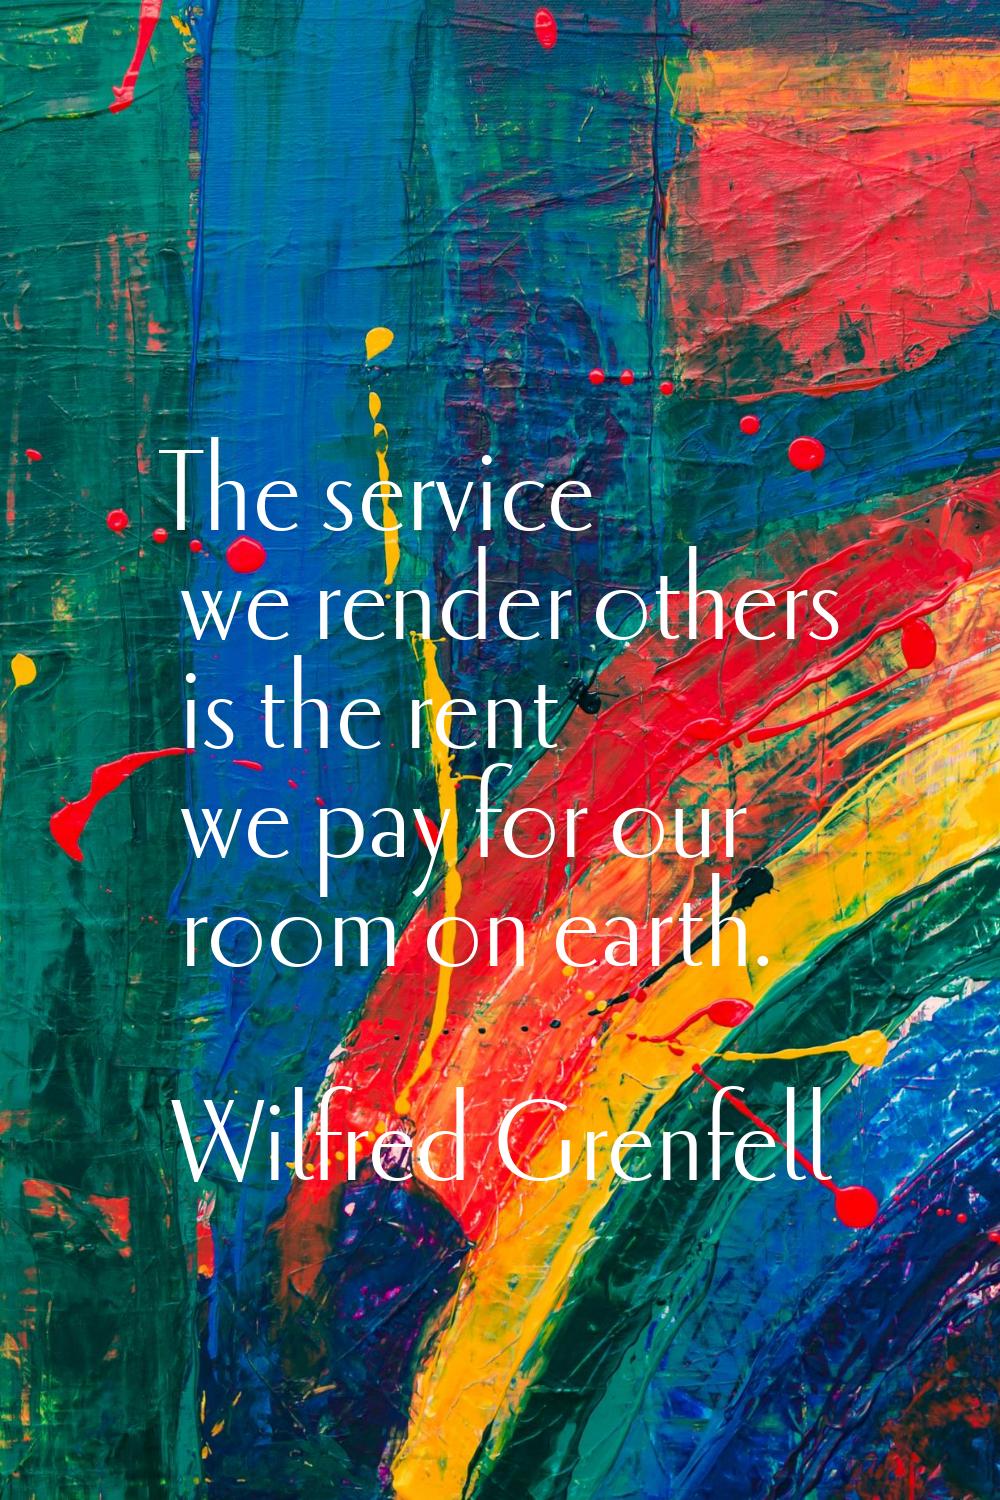 The service we render others is the rent we pay for our room on earth.